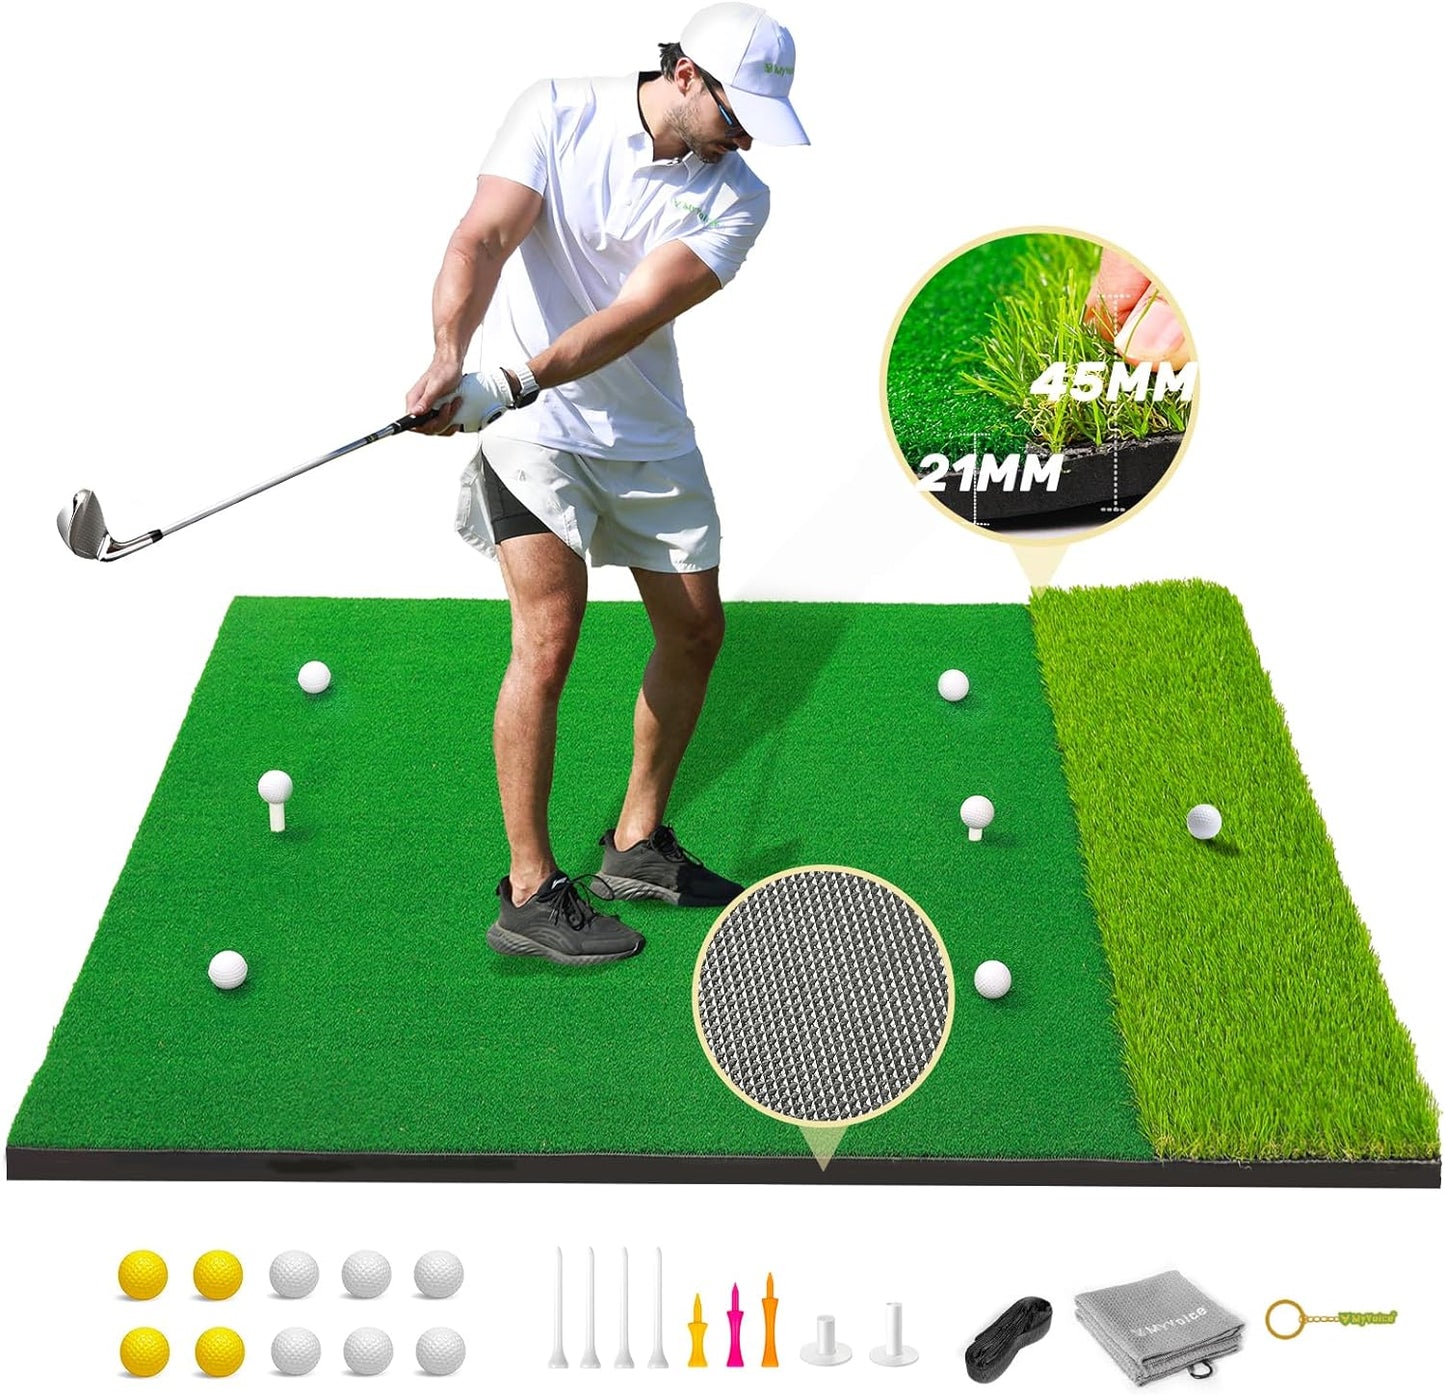 Pro Thickened Golf Mat Set - 5X4Ft | Premium Indoor/Outdoor Training for Precision Golf Shots | Multiple Turf Options | High-Elastic, Non-Slip Base | Perfect Golf Gift | Hitting Practice